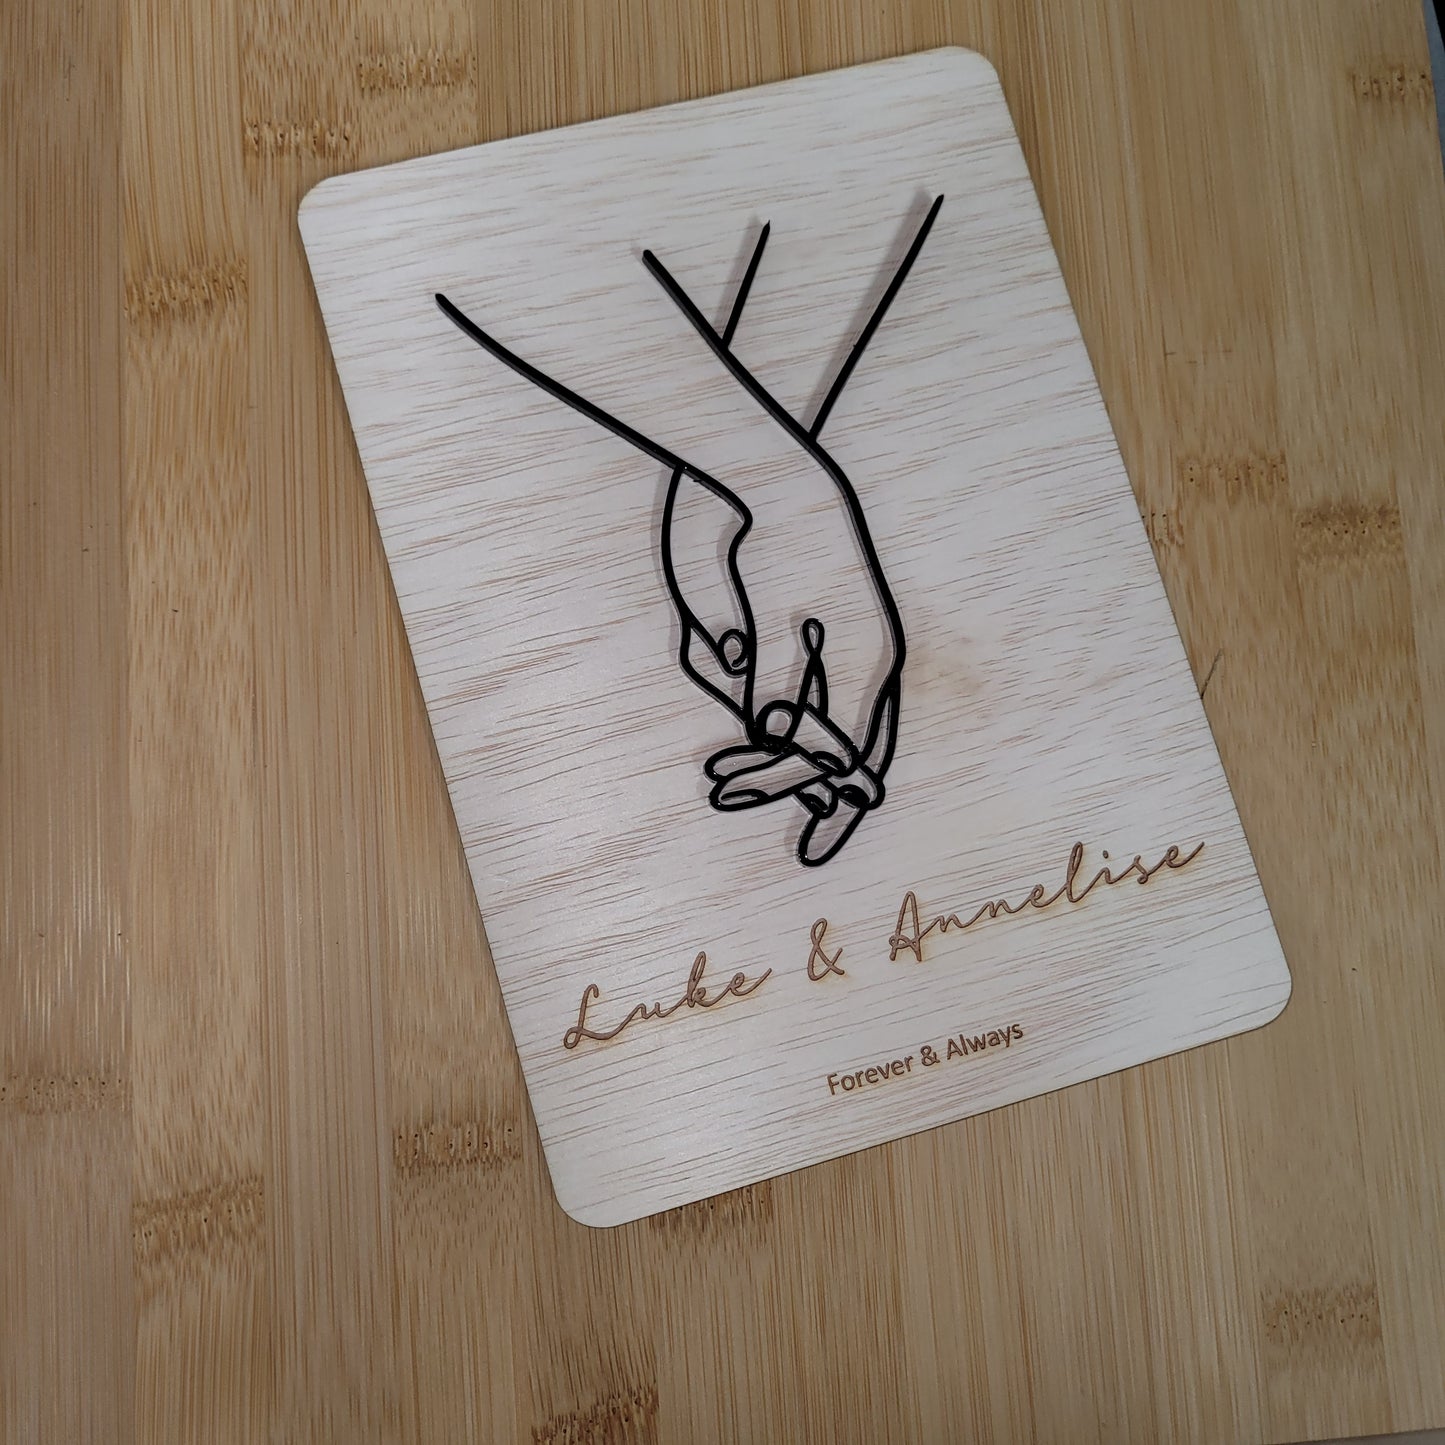 Holding hands plaque